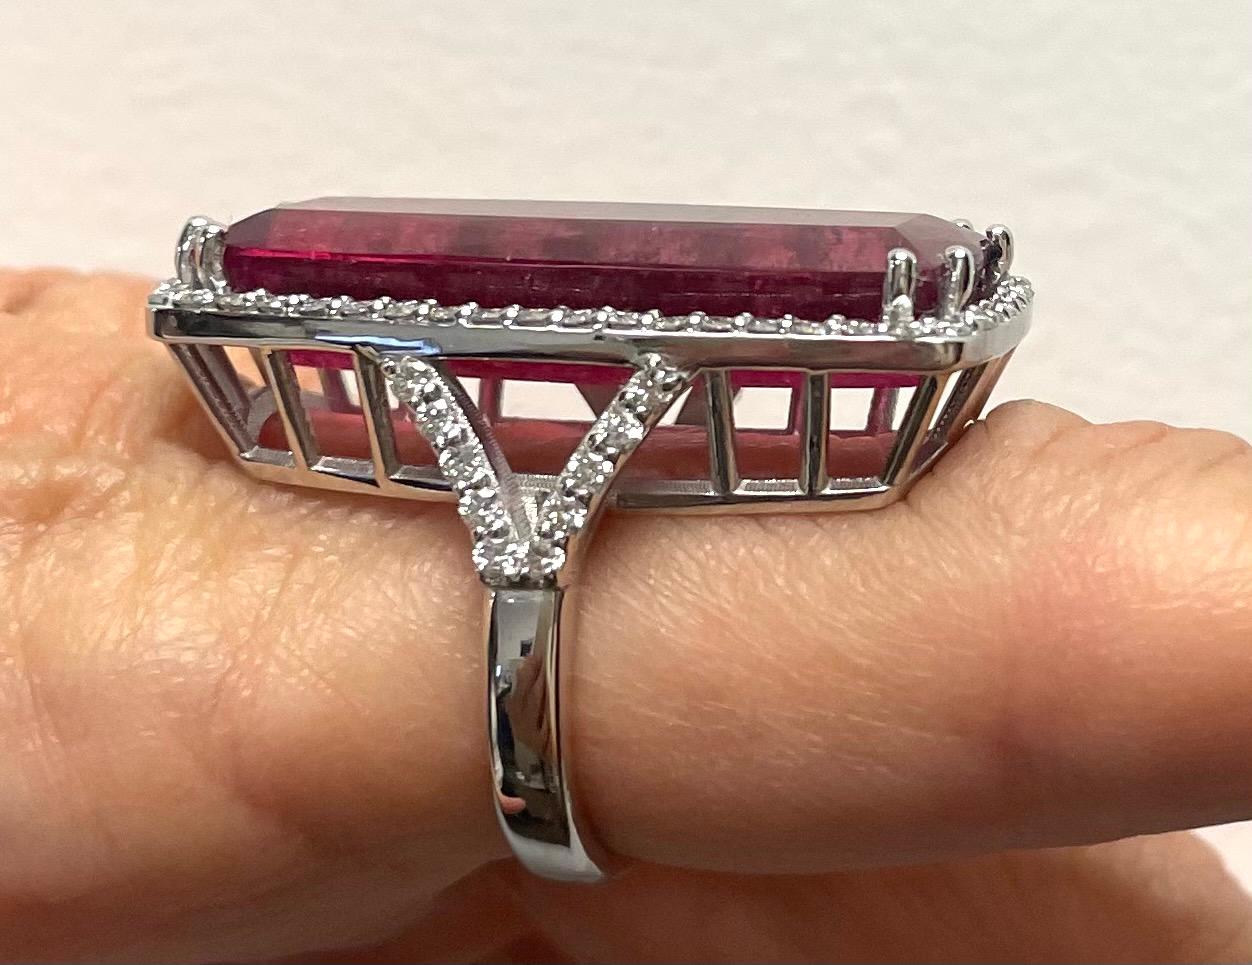 Description
This striking 25.5 carat elongated emerald cut Red Tourmaline ring is embellished with 1.32 carats pave diamonds, and is set in a 14k white gold Y-shape band. 
Item #R180

Materials and Weight
Red Tourmaline 25.5 cts 31.2x13.8x7.1mm,